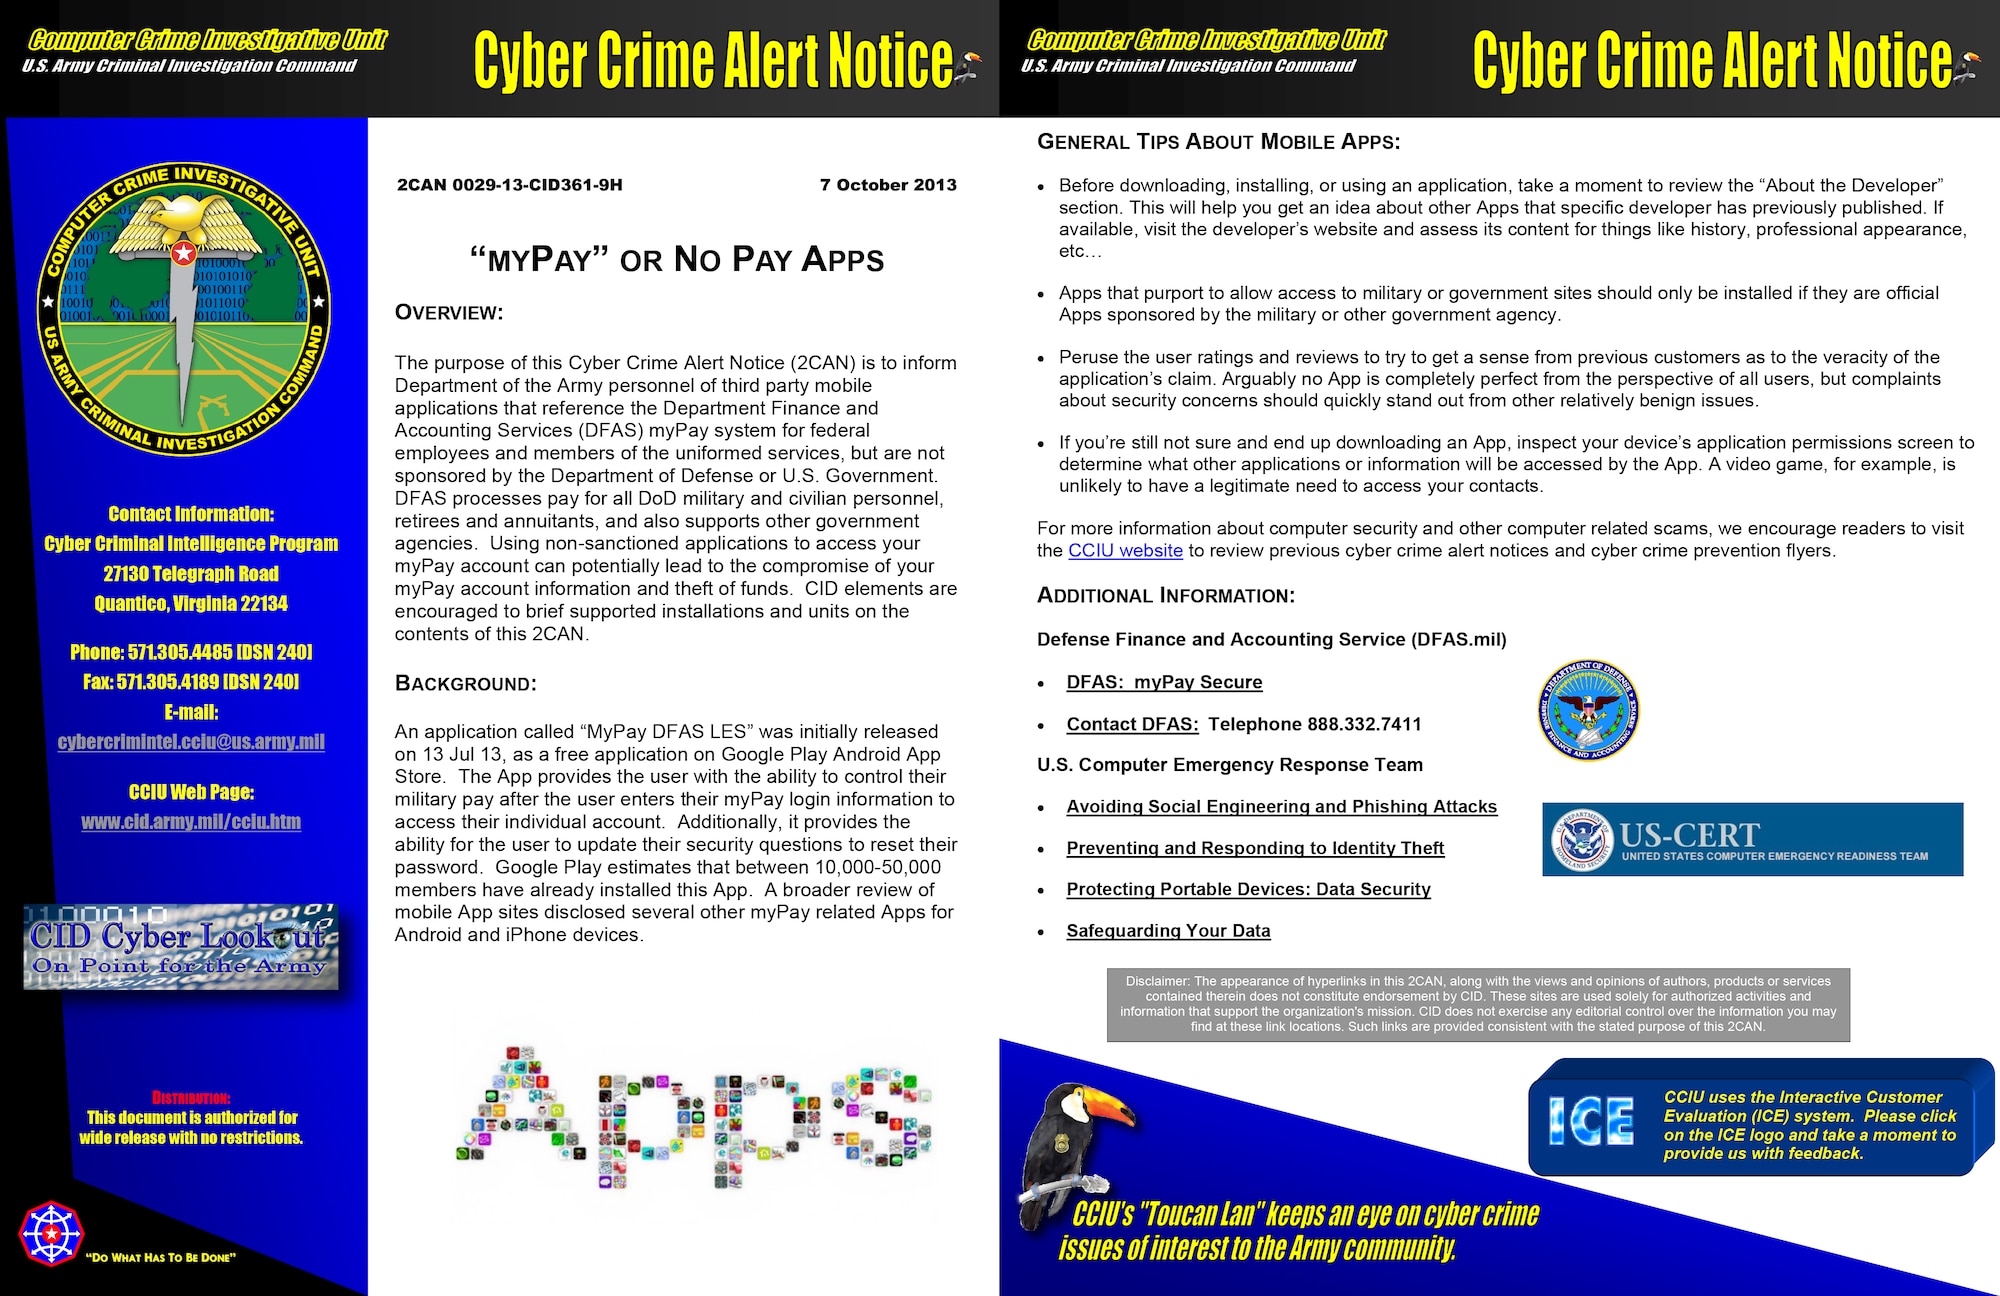 The Department of the Army Computer Crime Investigation Unit has issued a Cyber Crime Alert Notice about the use of any third-party mobile applications to access the Department Finance and Accounting Services myPay system that have not been sponsered by the Department of Defense. (Courtesy graphic)